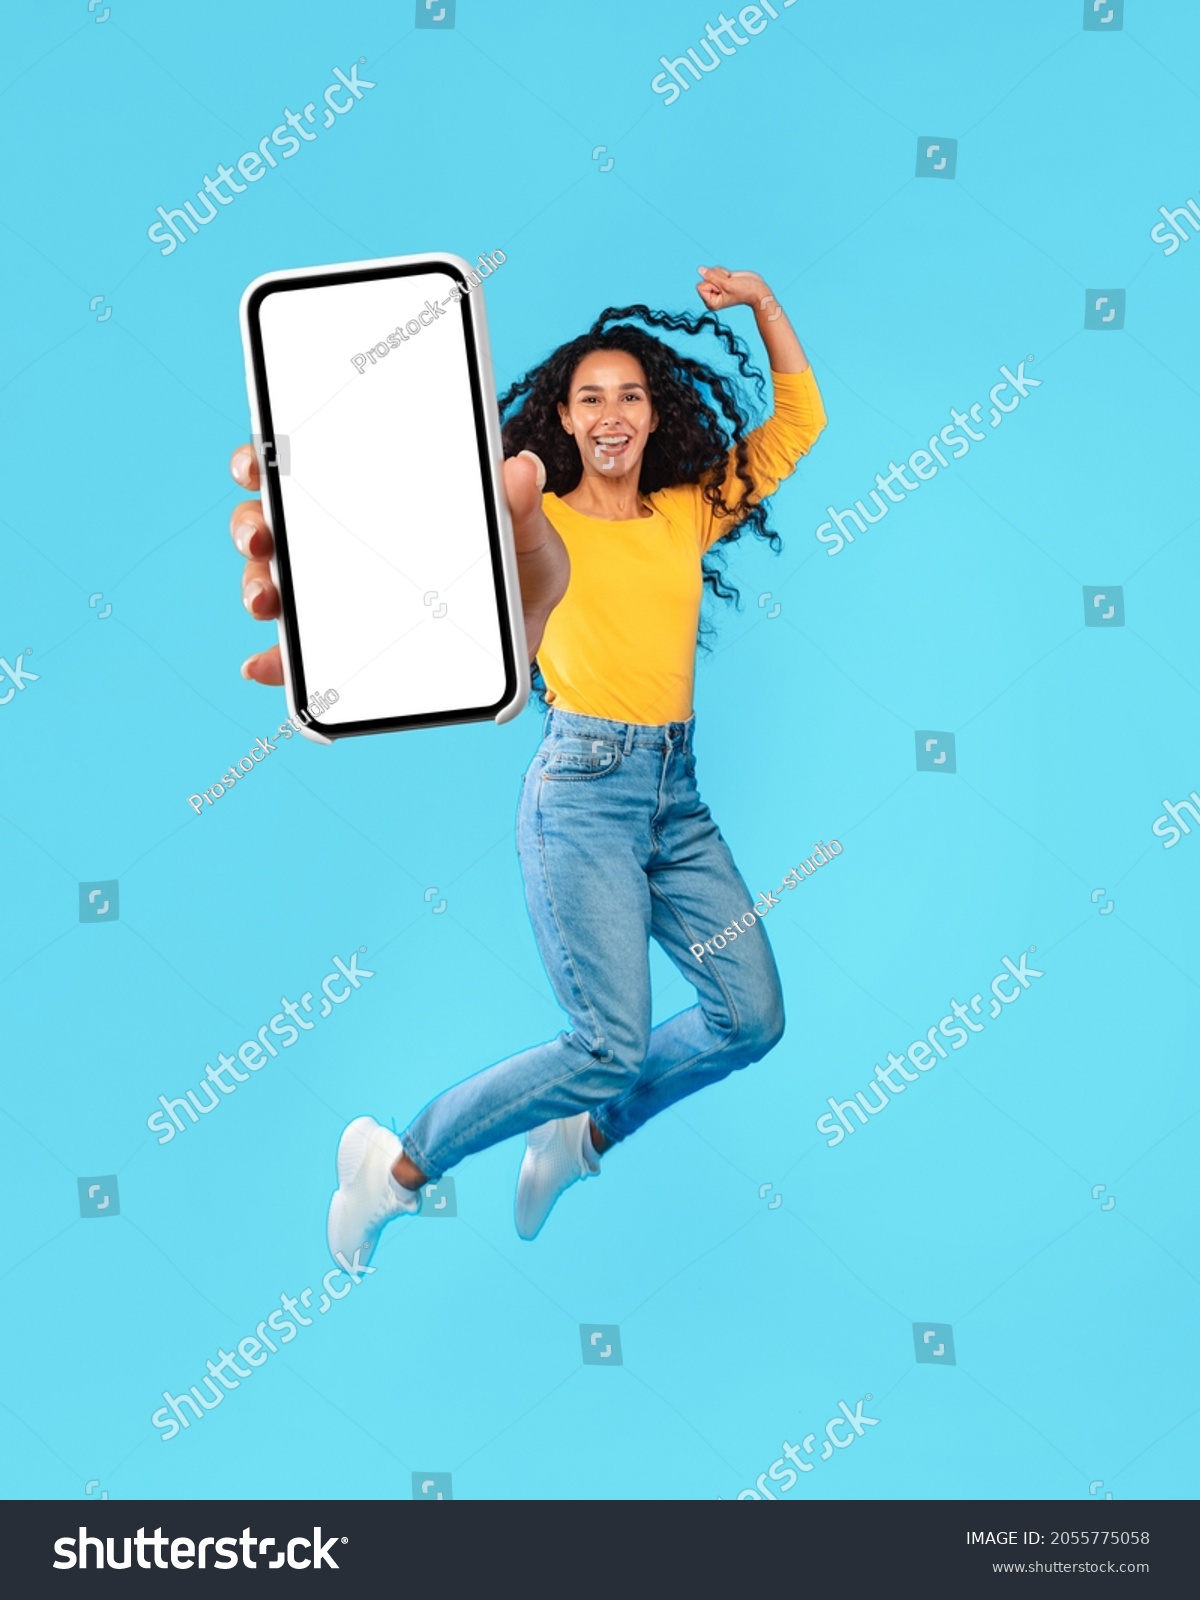 Happy Arab Female Jumping Up Showing Big Blank Smartphone Screen Advertising Great Application On Blue Background. Middle-Eastern Woman Holding Huge Cellphone For App Advertisement. Mockup, Collage #2055775058